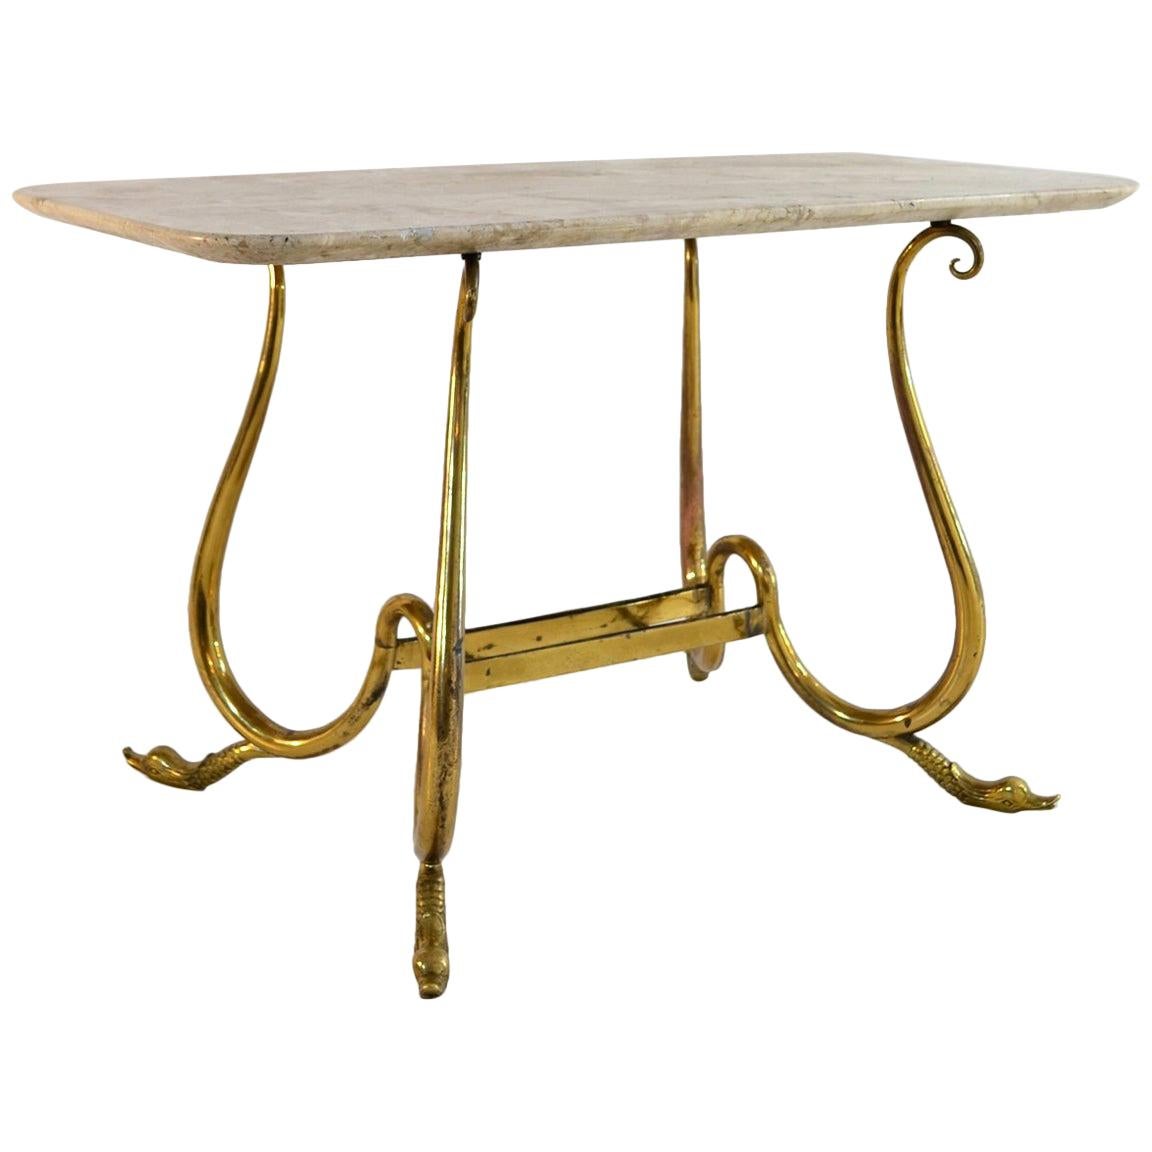 Midcentury Italian Marble Cocktail Table with Brass Legs